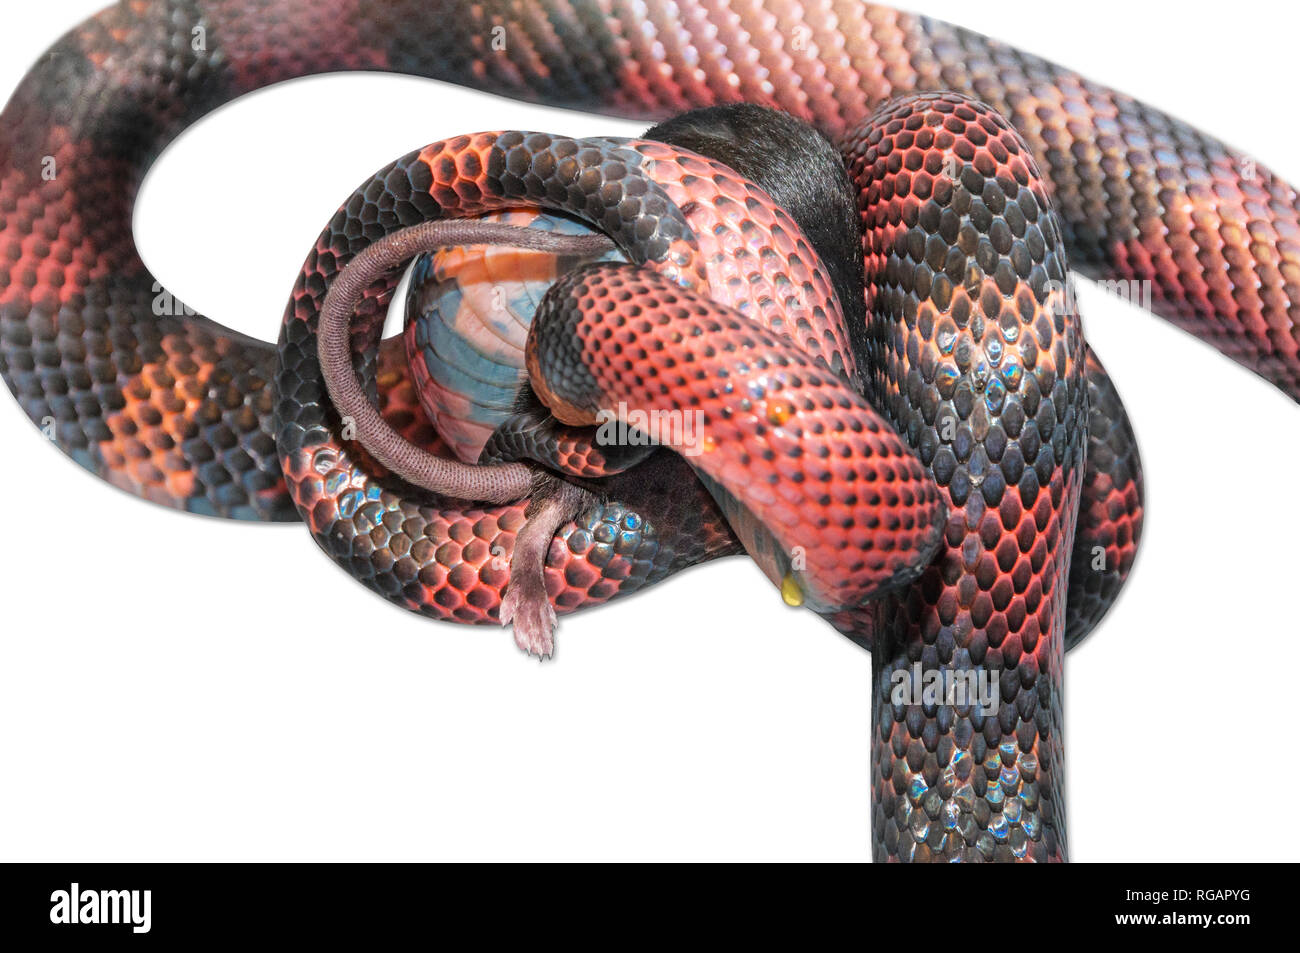 Nicaraguan Milk Snake (Lampropeltis triangulum) killling a brown mouse (Mus musculus). White background cut out. Stock Photo